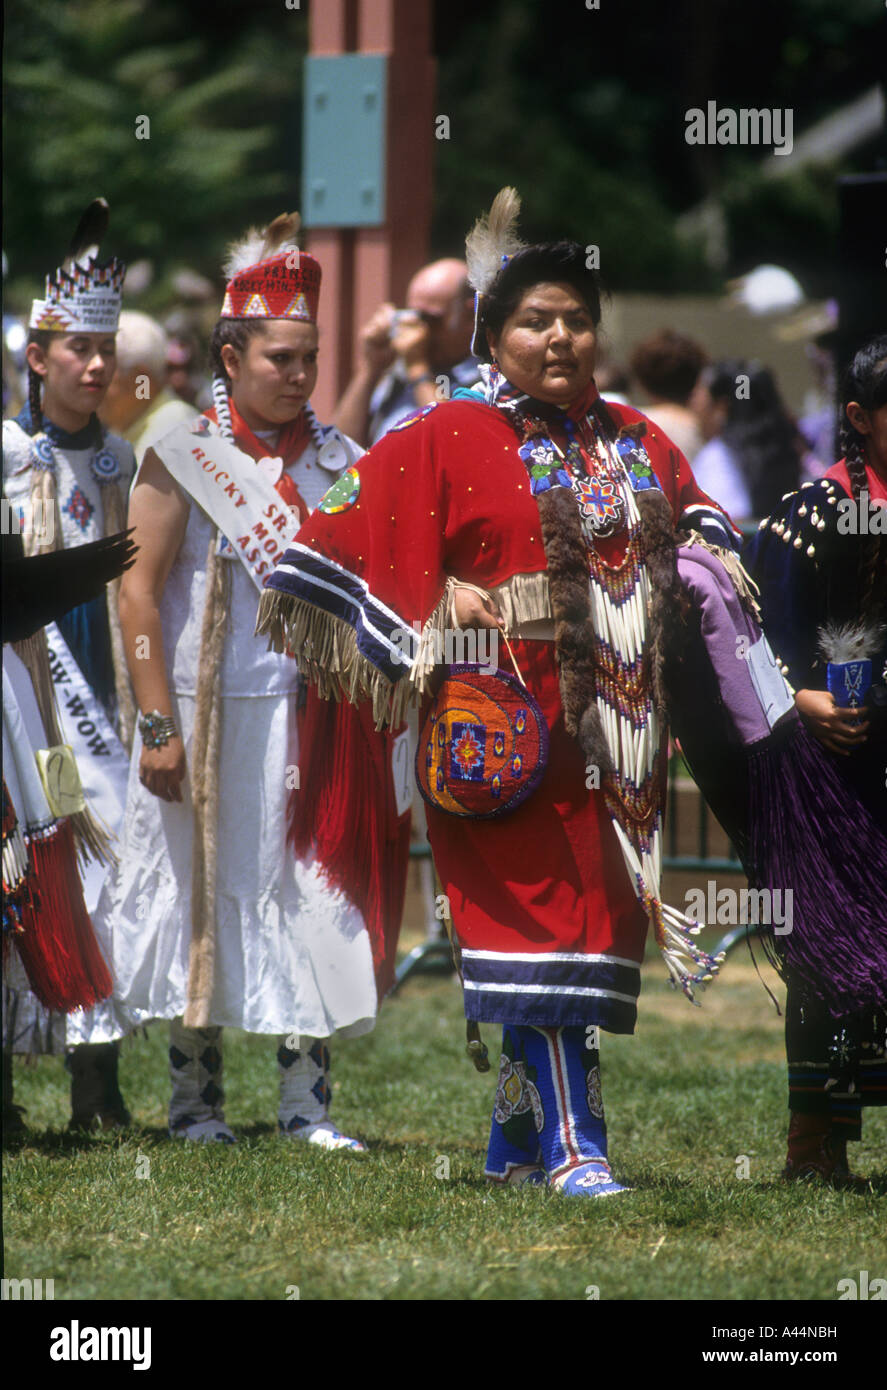 Lakota Sioux Native American Indians.Holding A Pow Wow In Denver